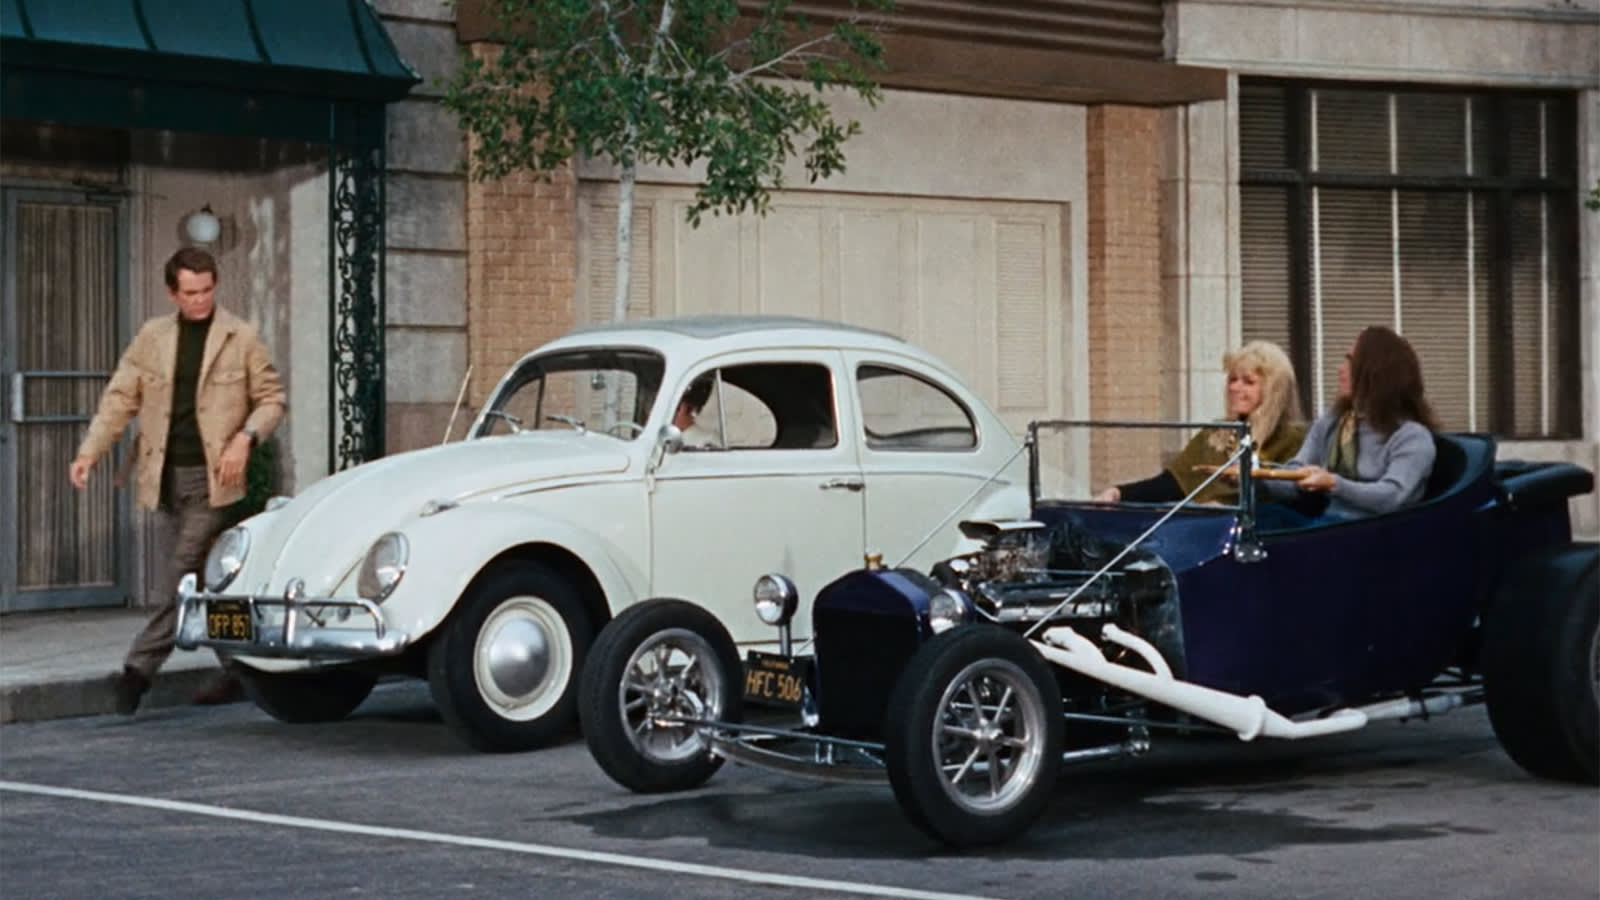 Herbie and the hot rod in "the love bug"